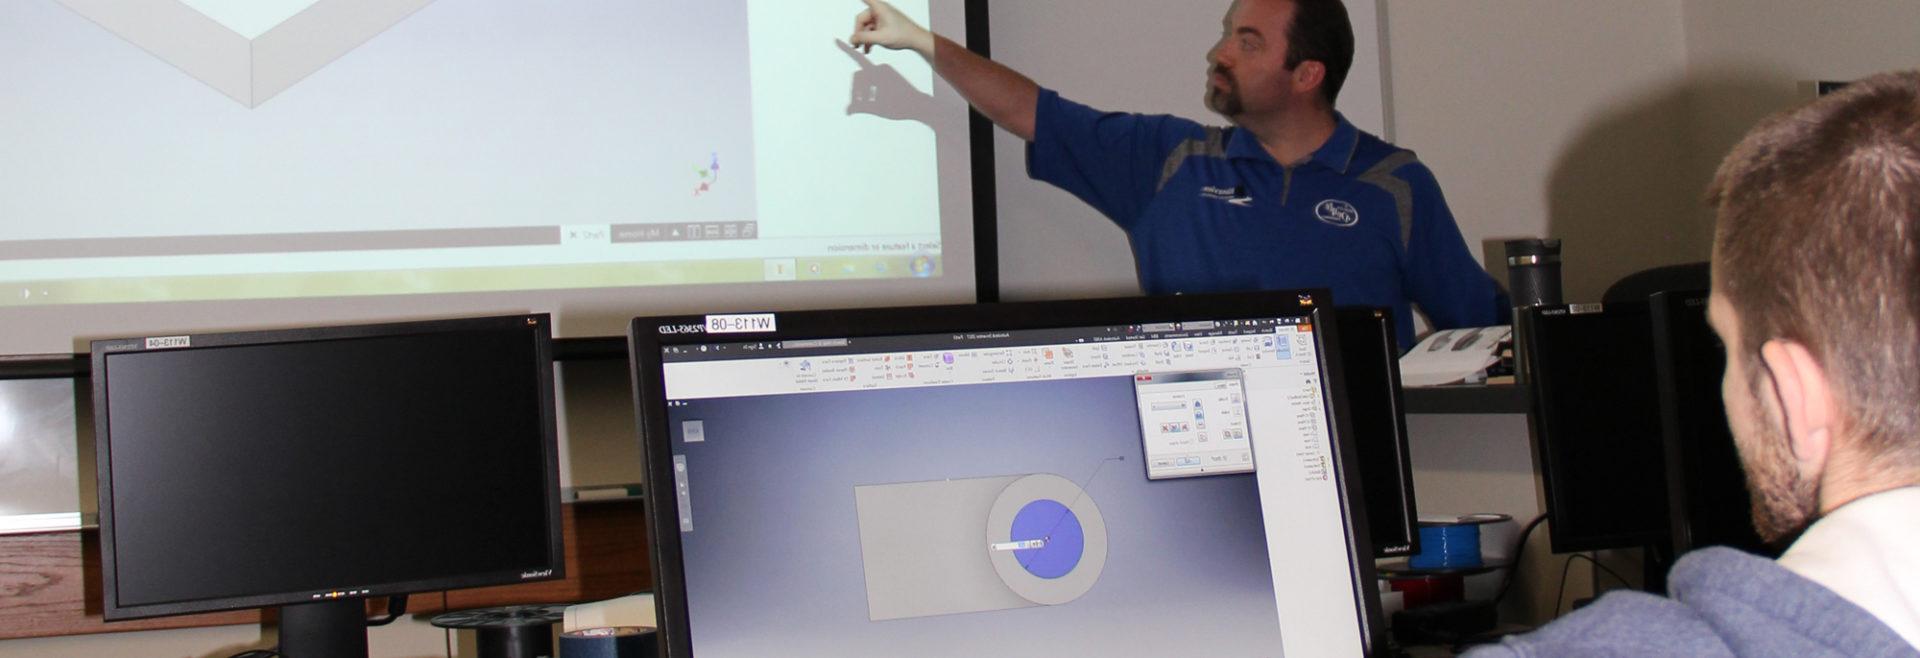 Instructor showing slides on the drop down screen